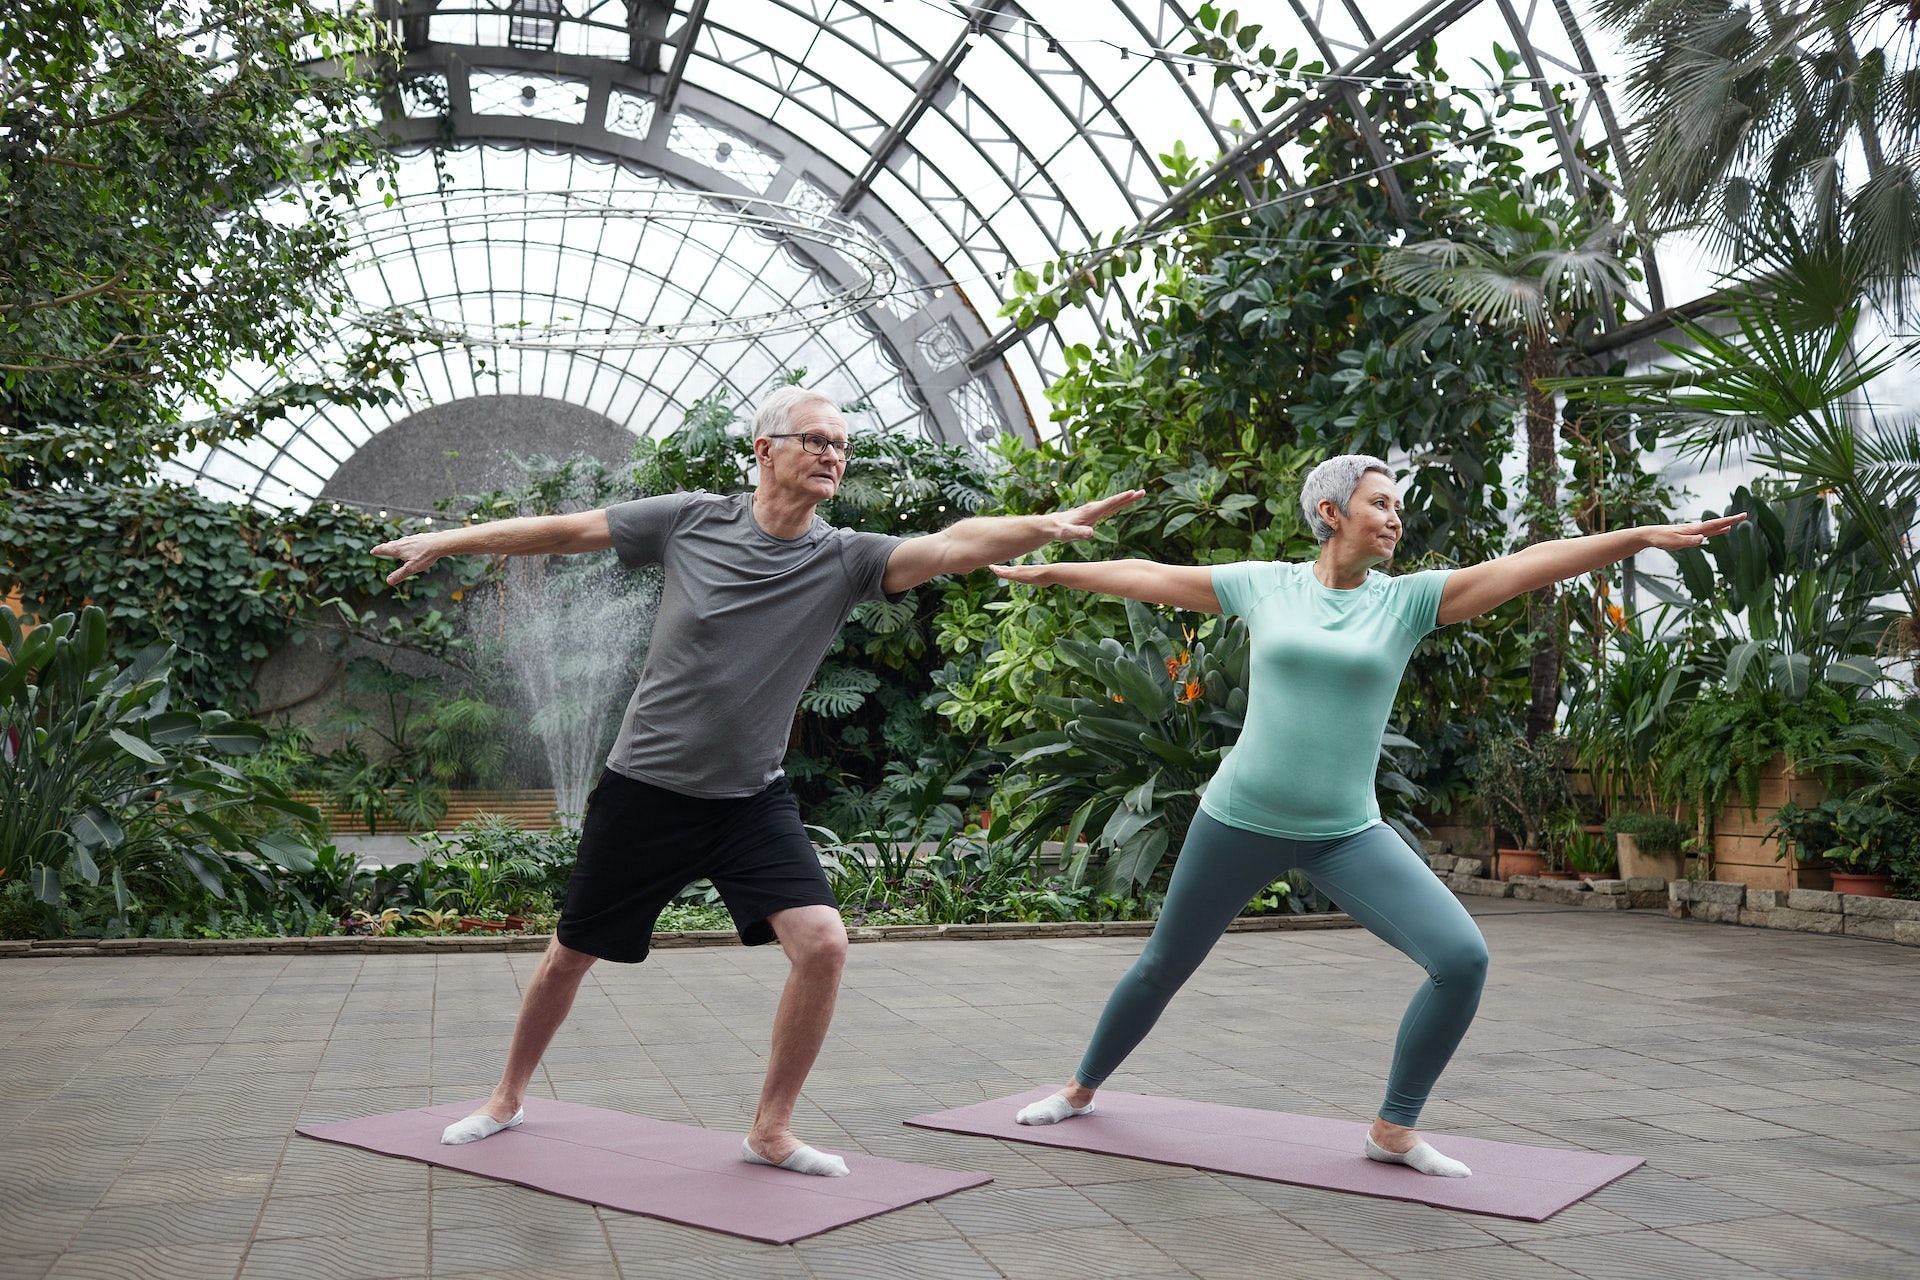 Balance exercises for seniors are important to keep the body active and independent. (Photo via Pexels/Marcus Aurelius)